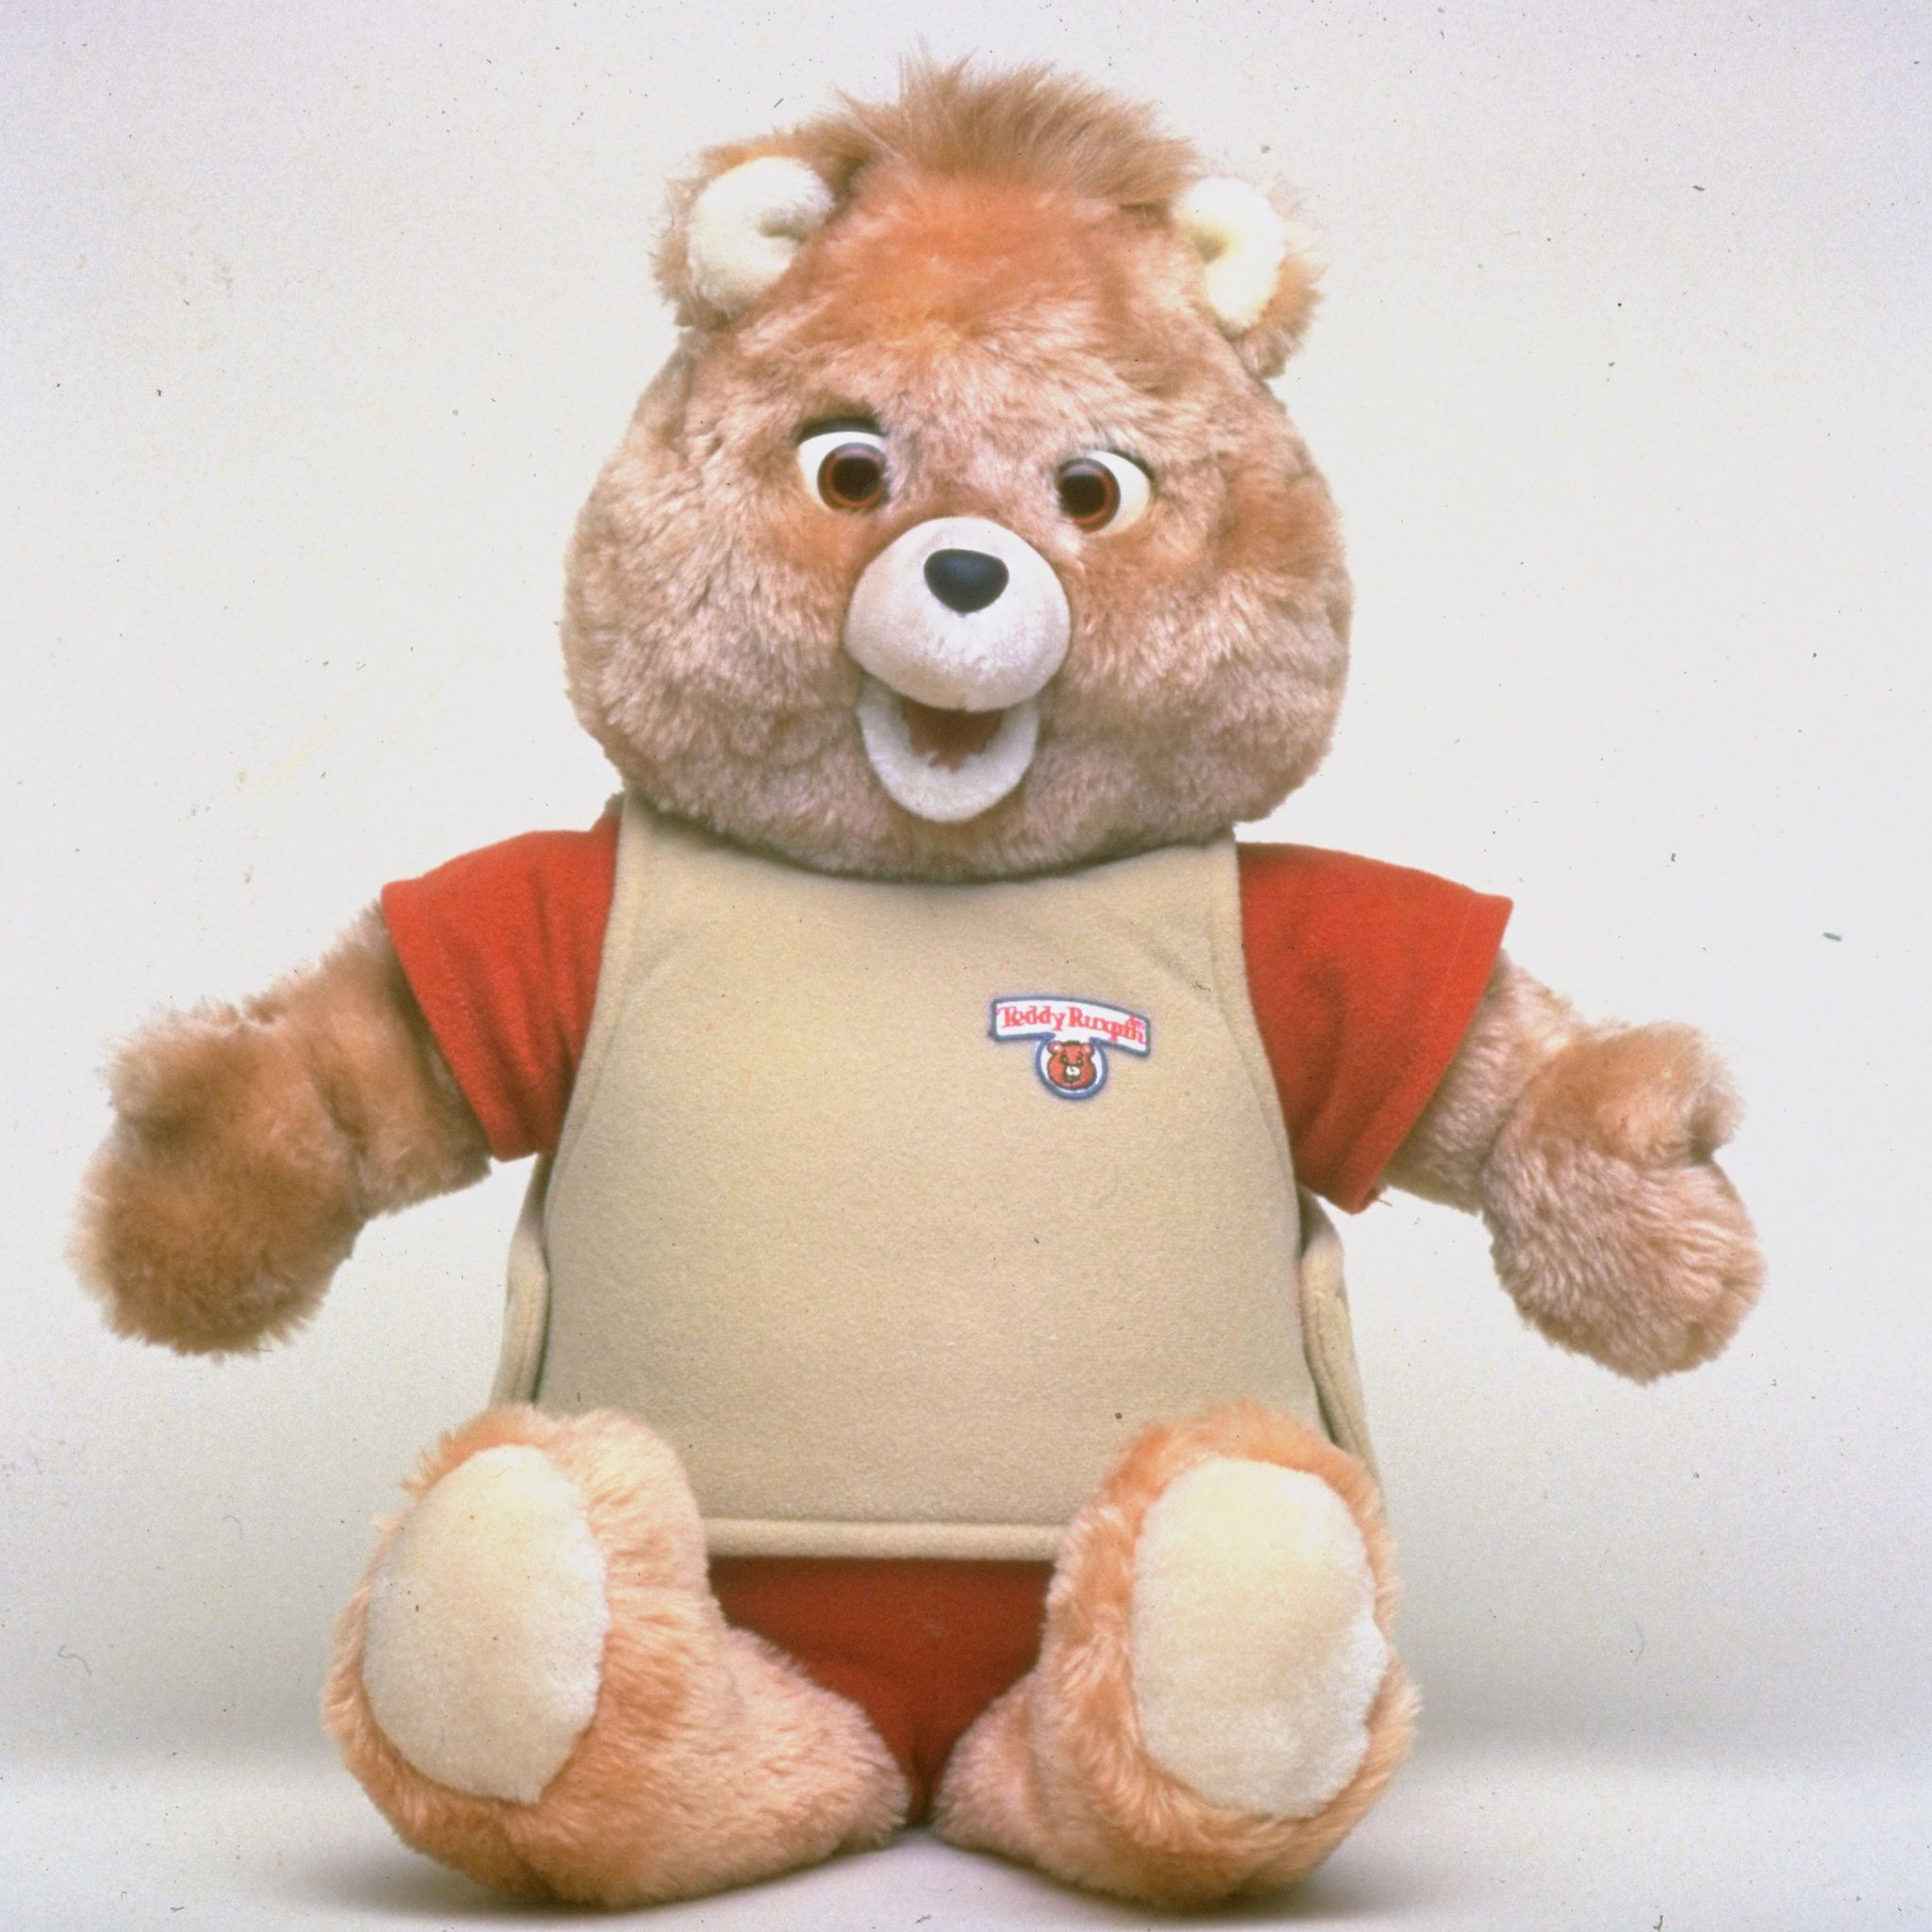 collectible stuffed animals from the 90s